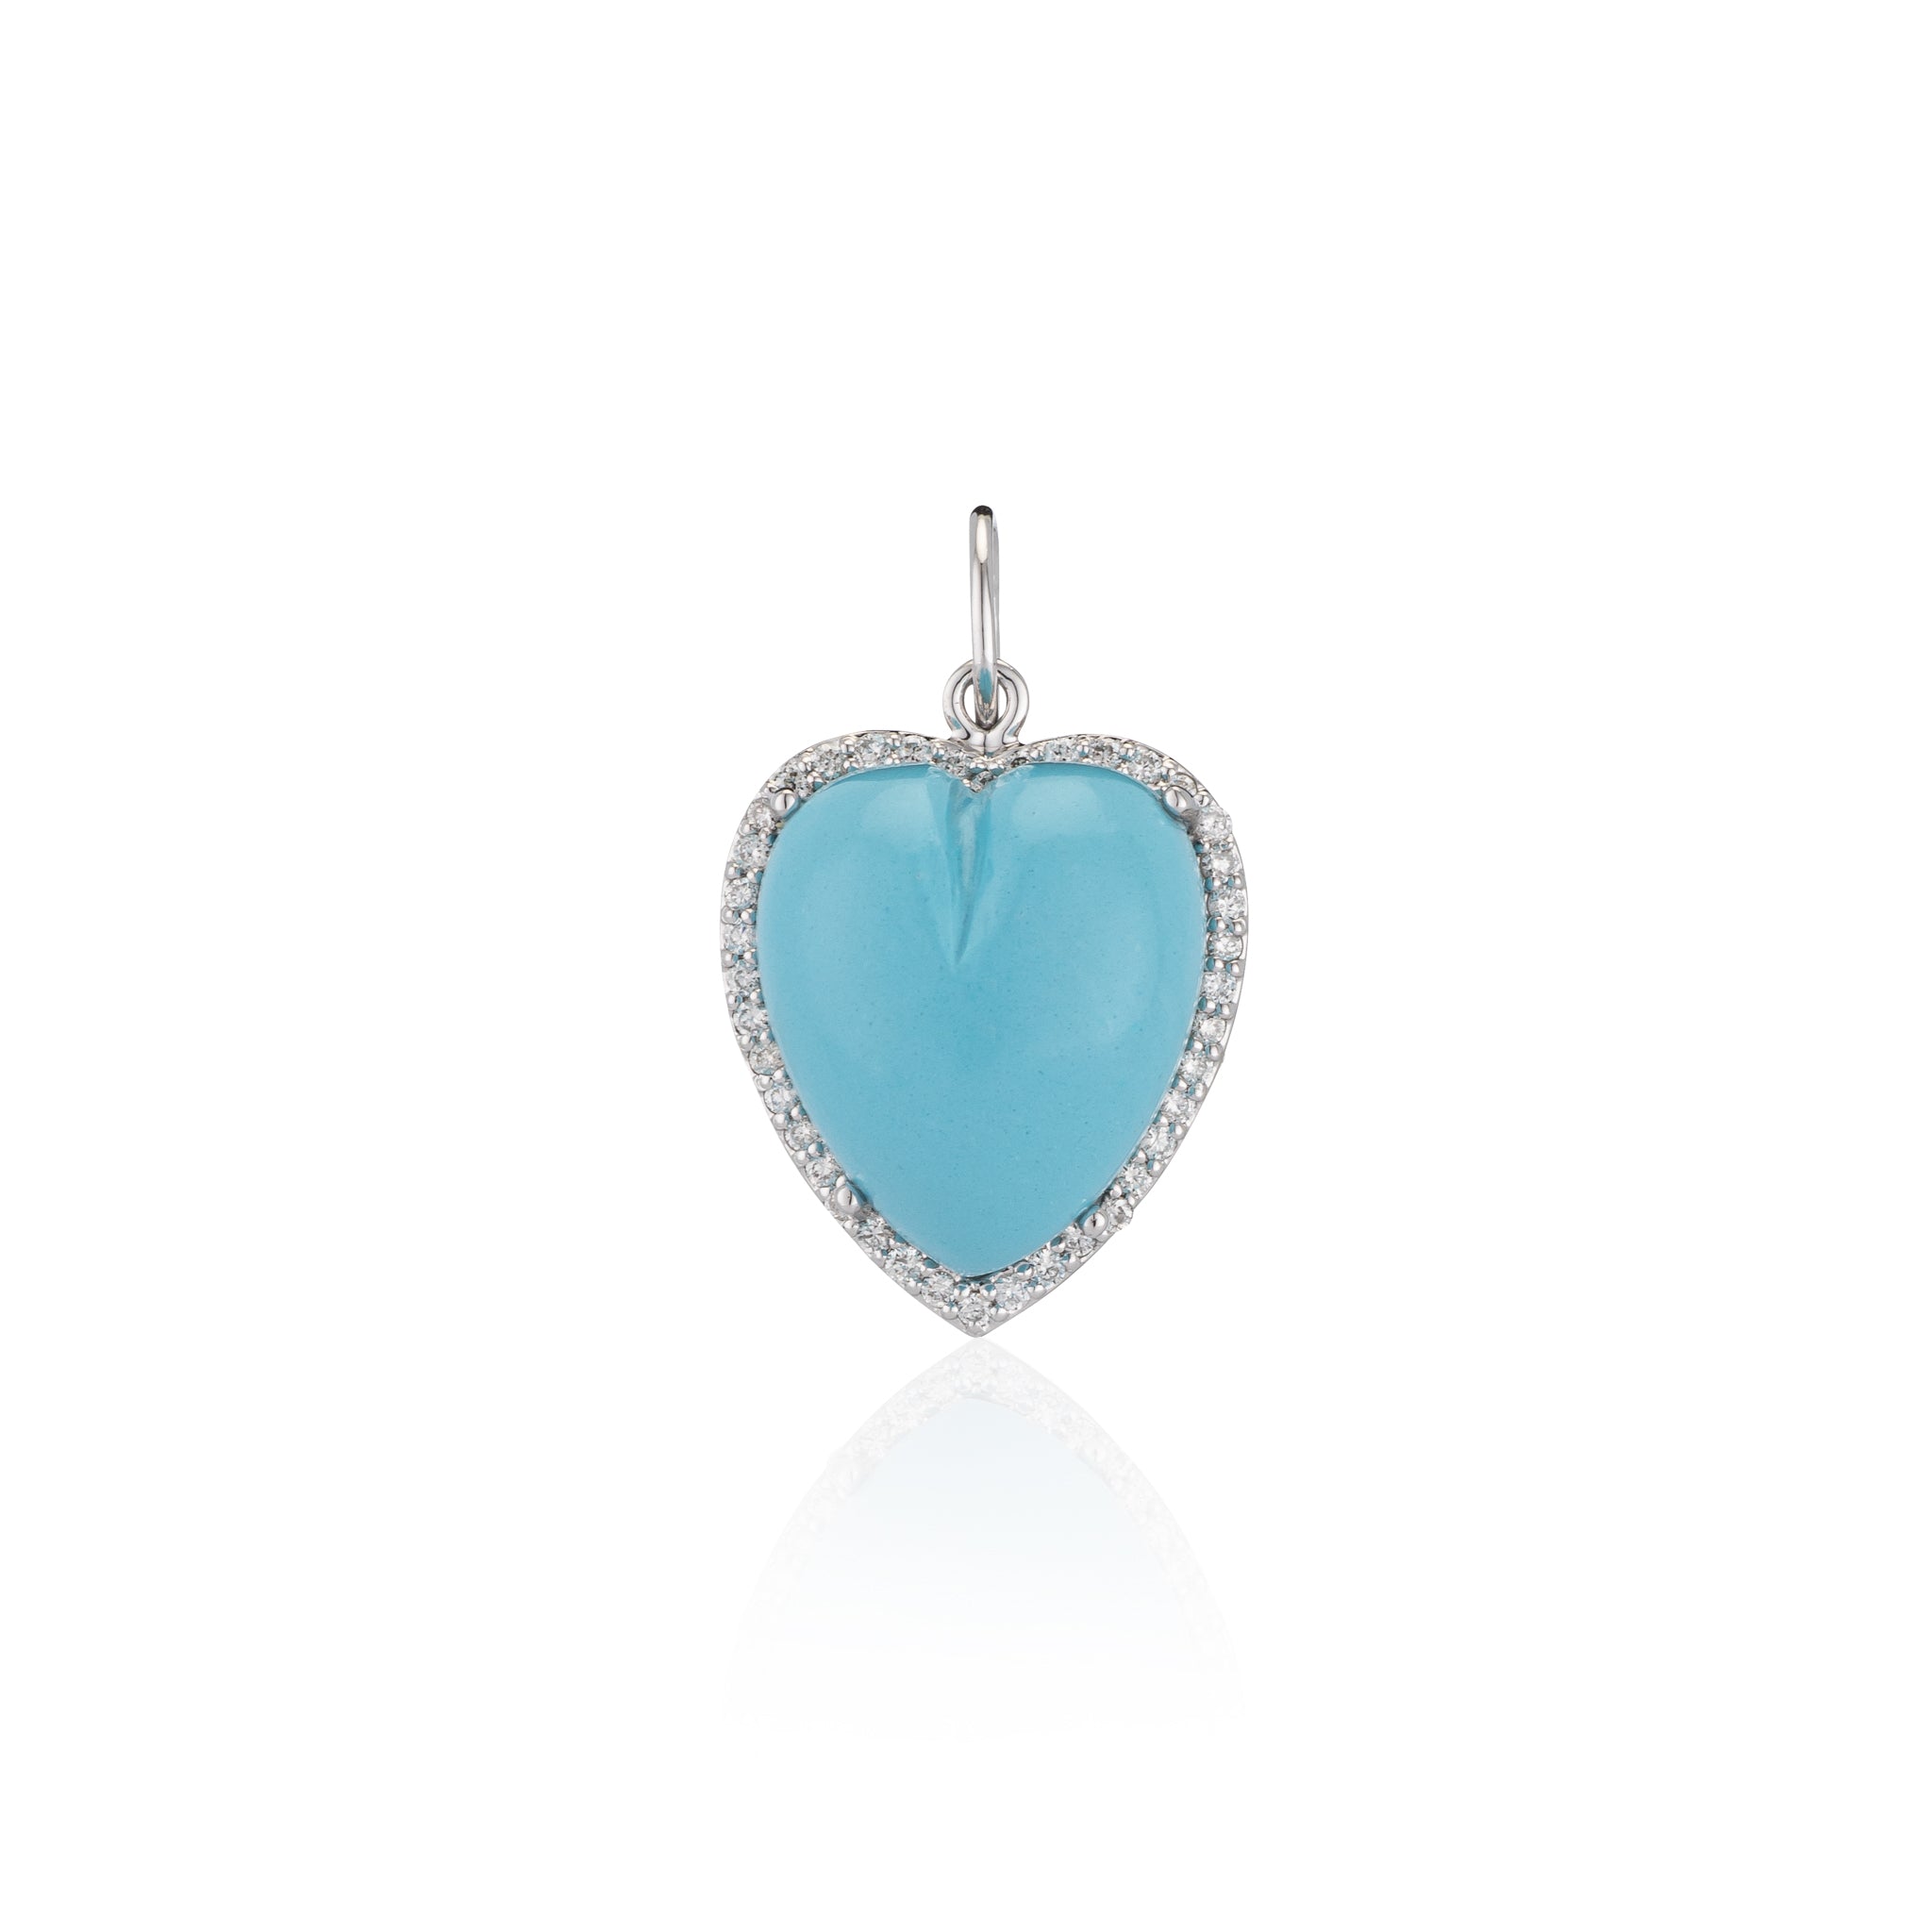 White Gold Diamond and Turquoise Chubby Heart Charm